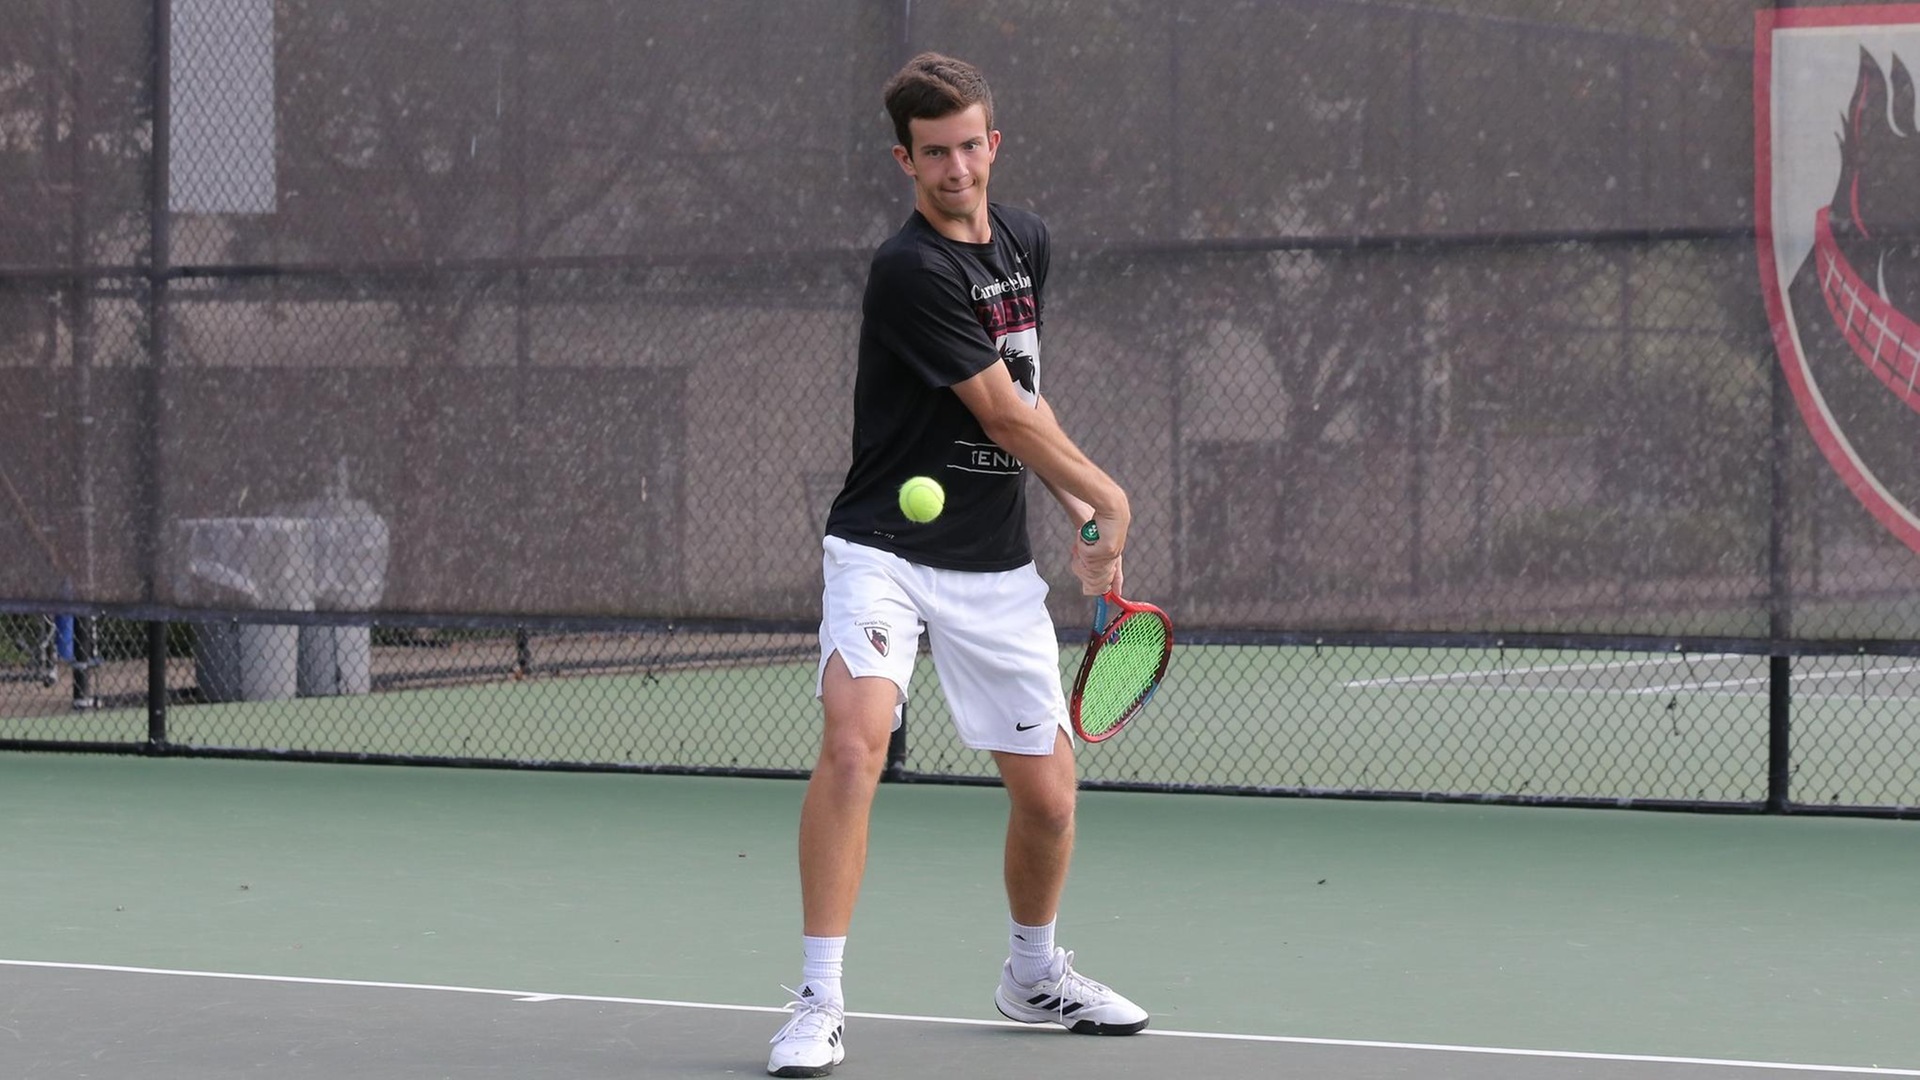 men's tennis player wearing black shirt and white shorts preparing to hit ball with racquet